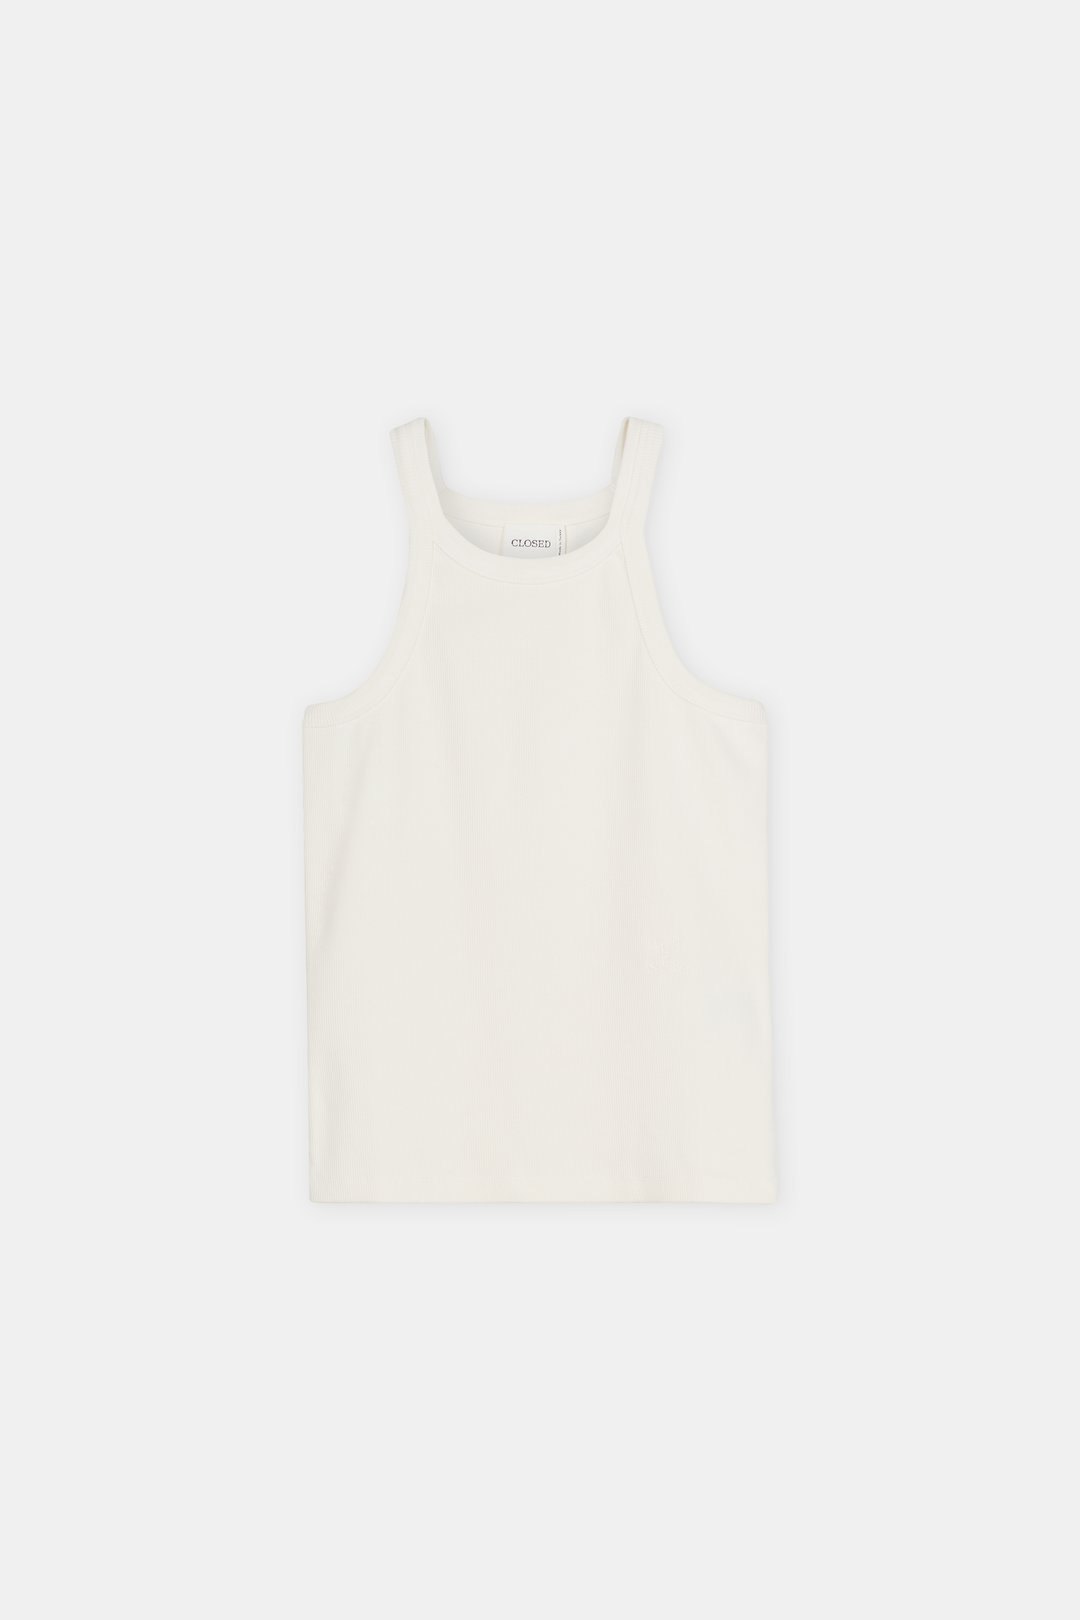 Closed Ivory Racer Top